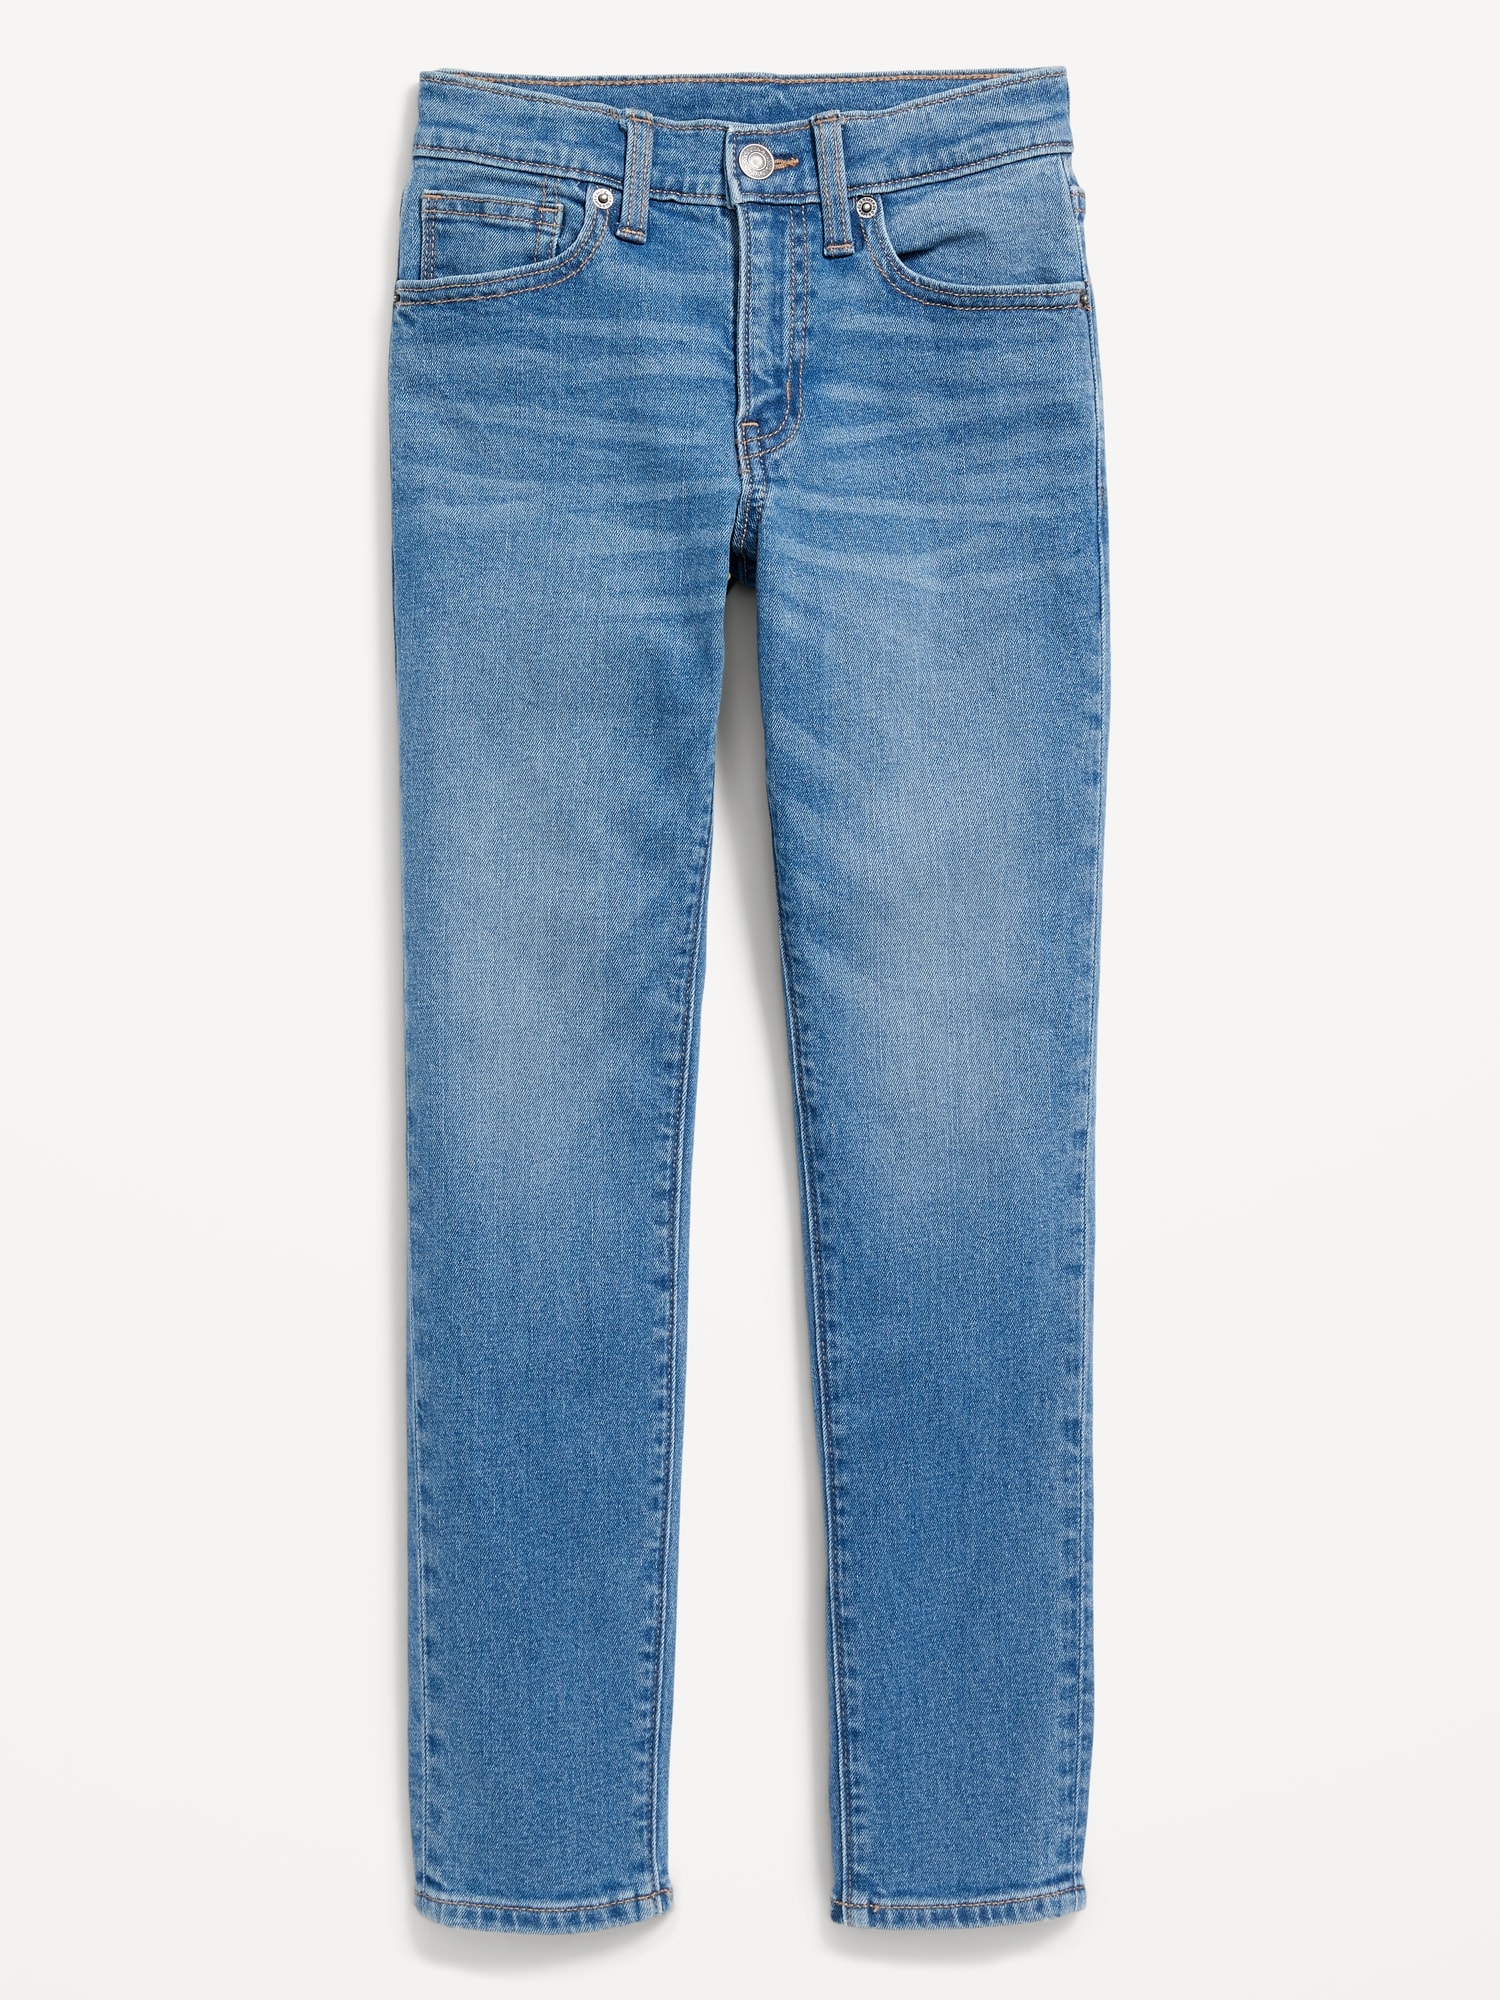 Straight Fit Faded YANGER BOYS MEANS BLUE JEANS at Rs 550/piece in